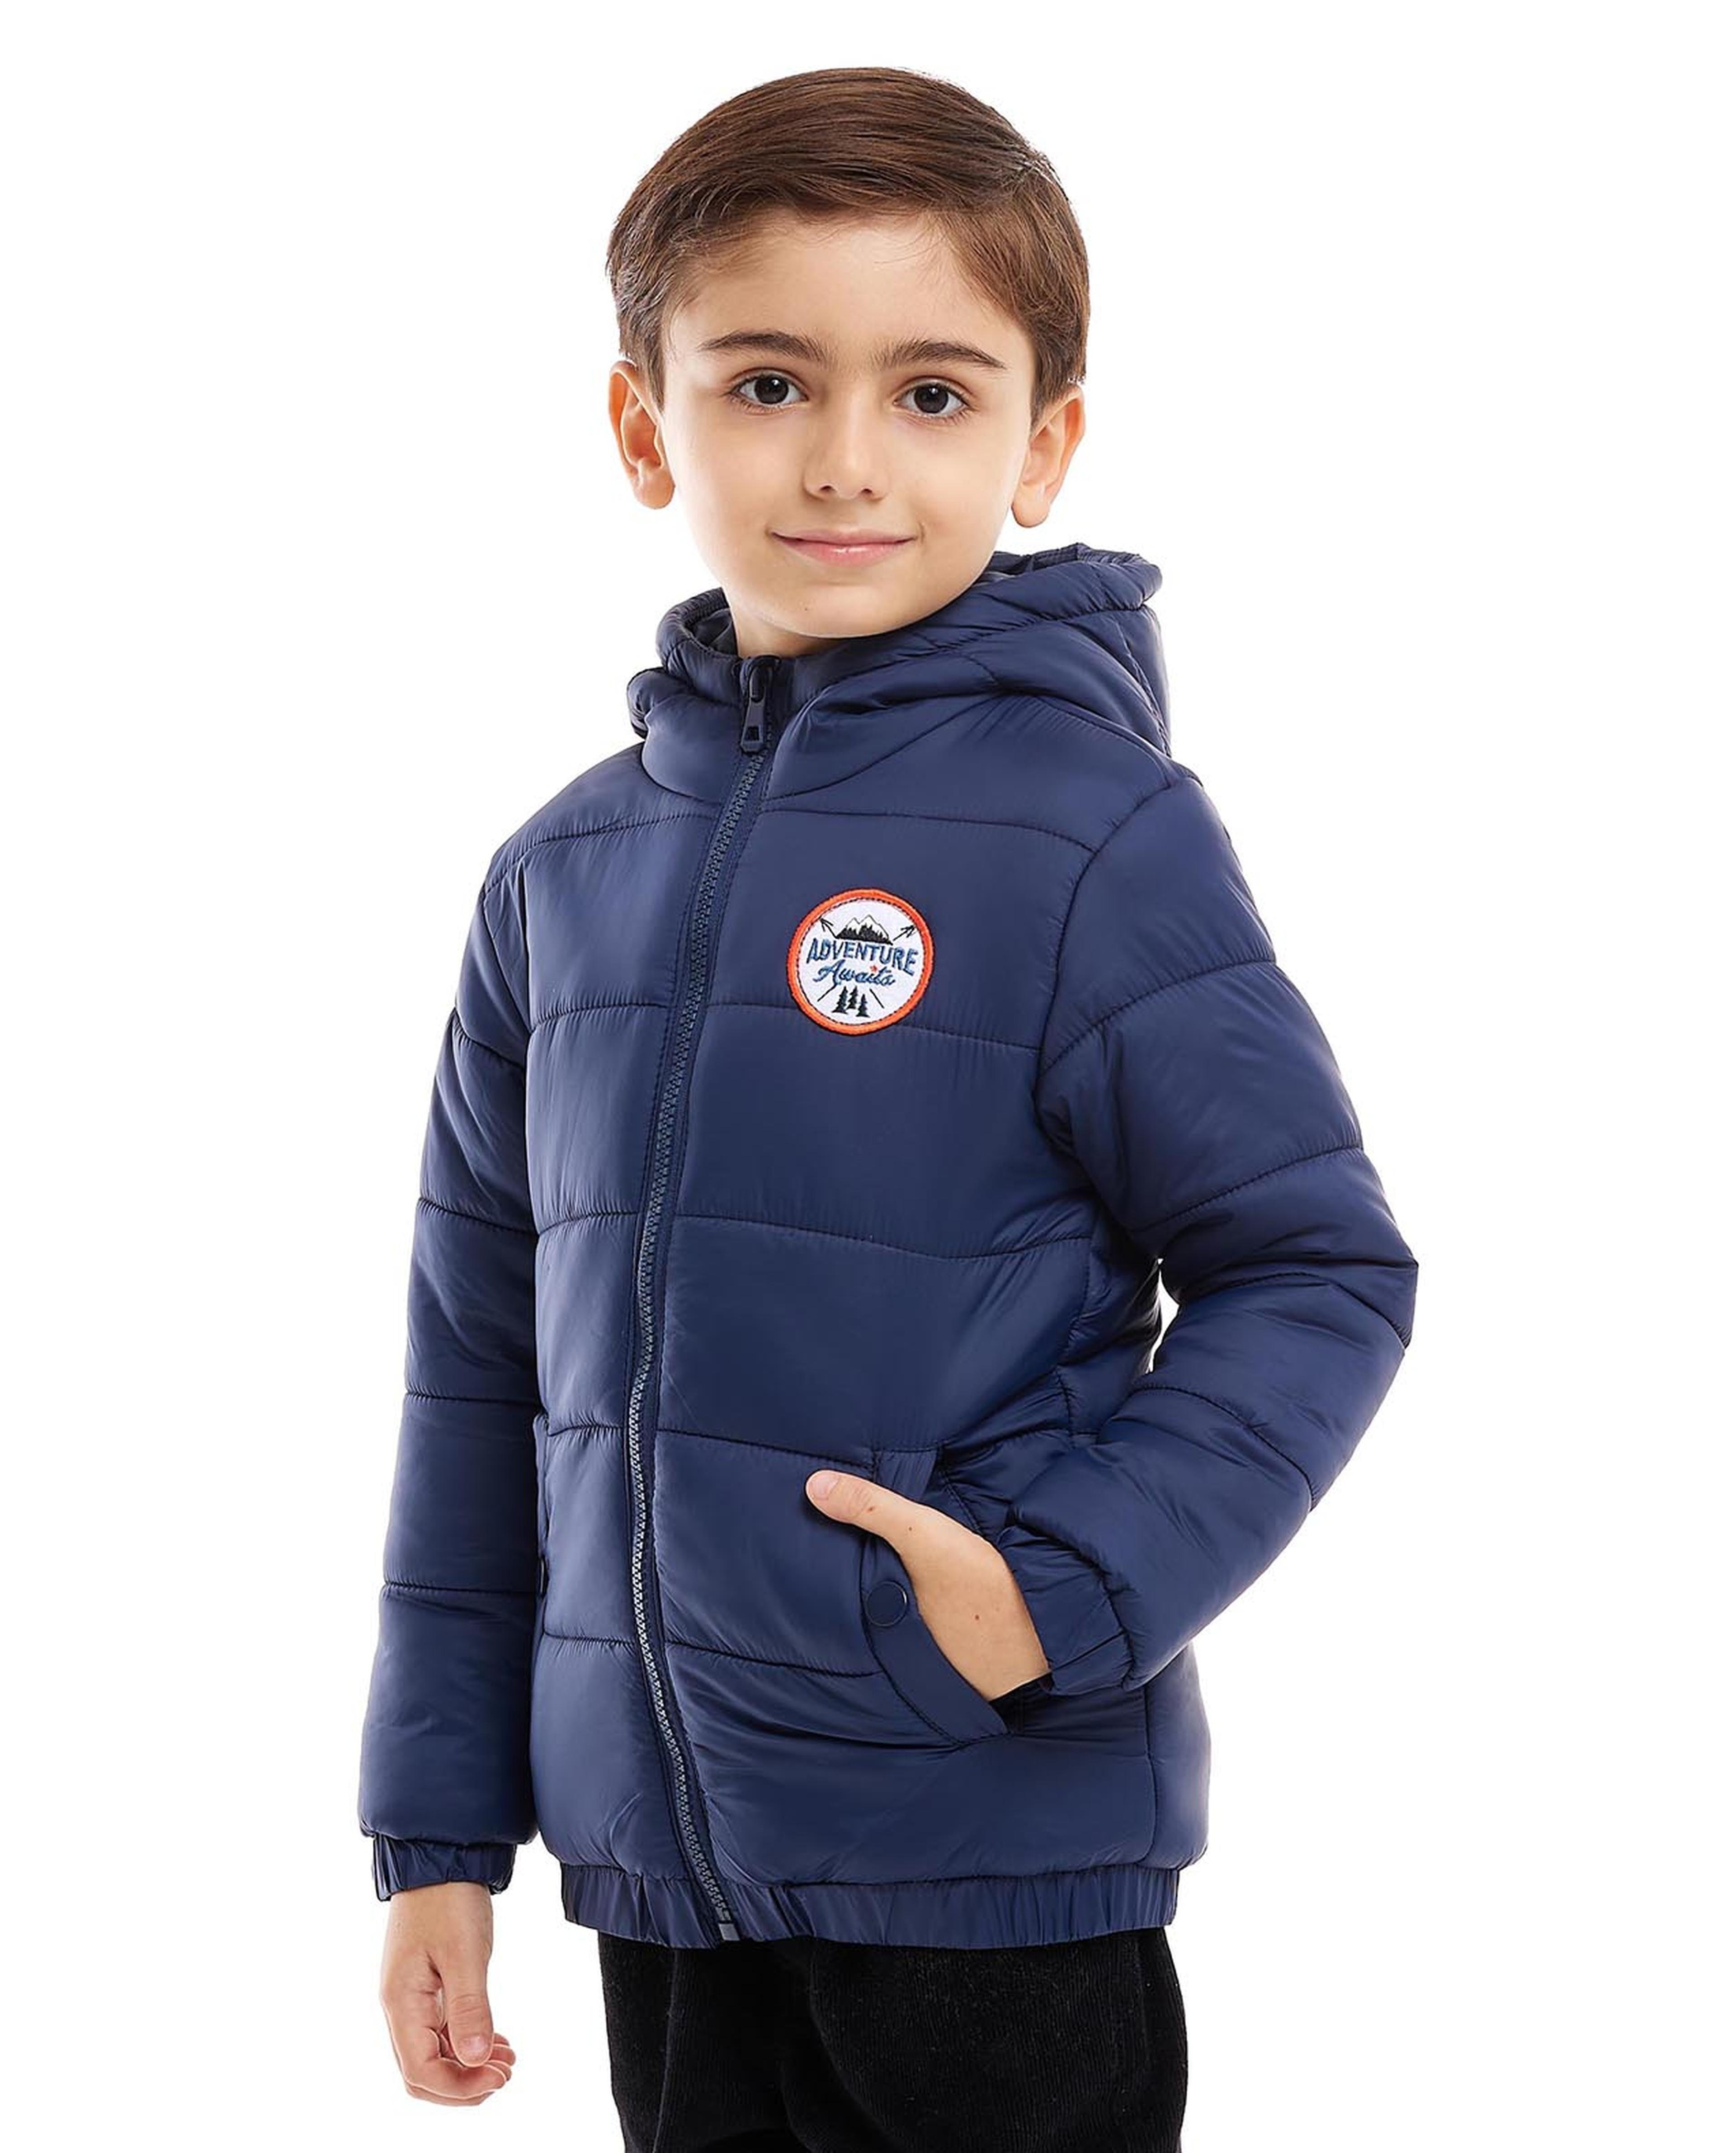 Badge Detail Hooded Puffer Jacket with Zipper Closure